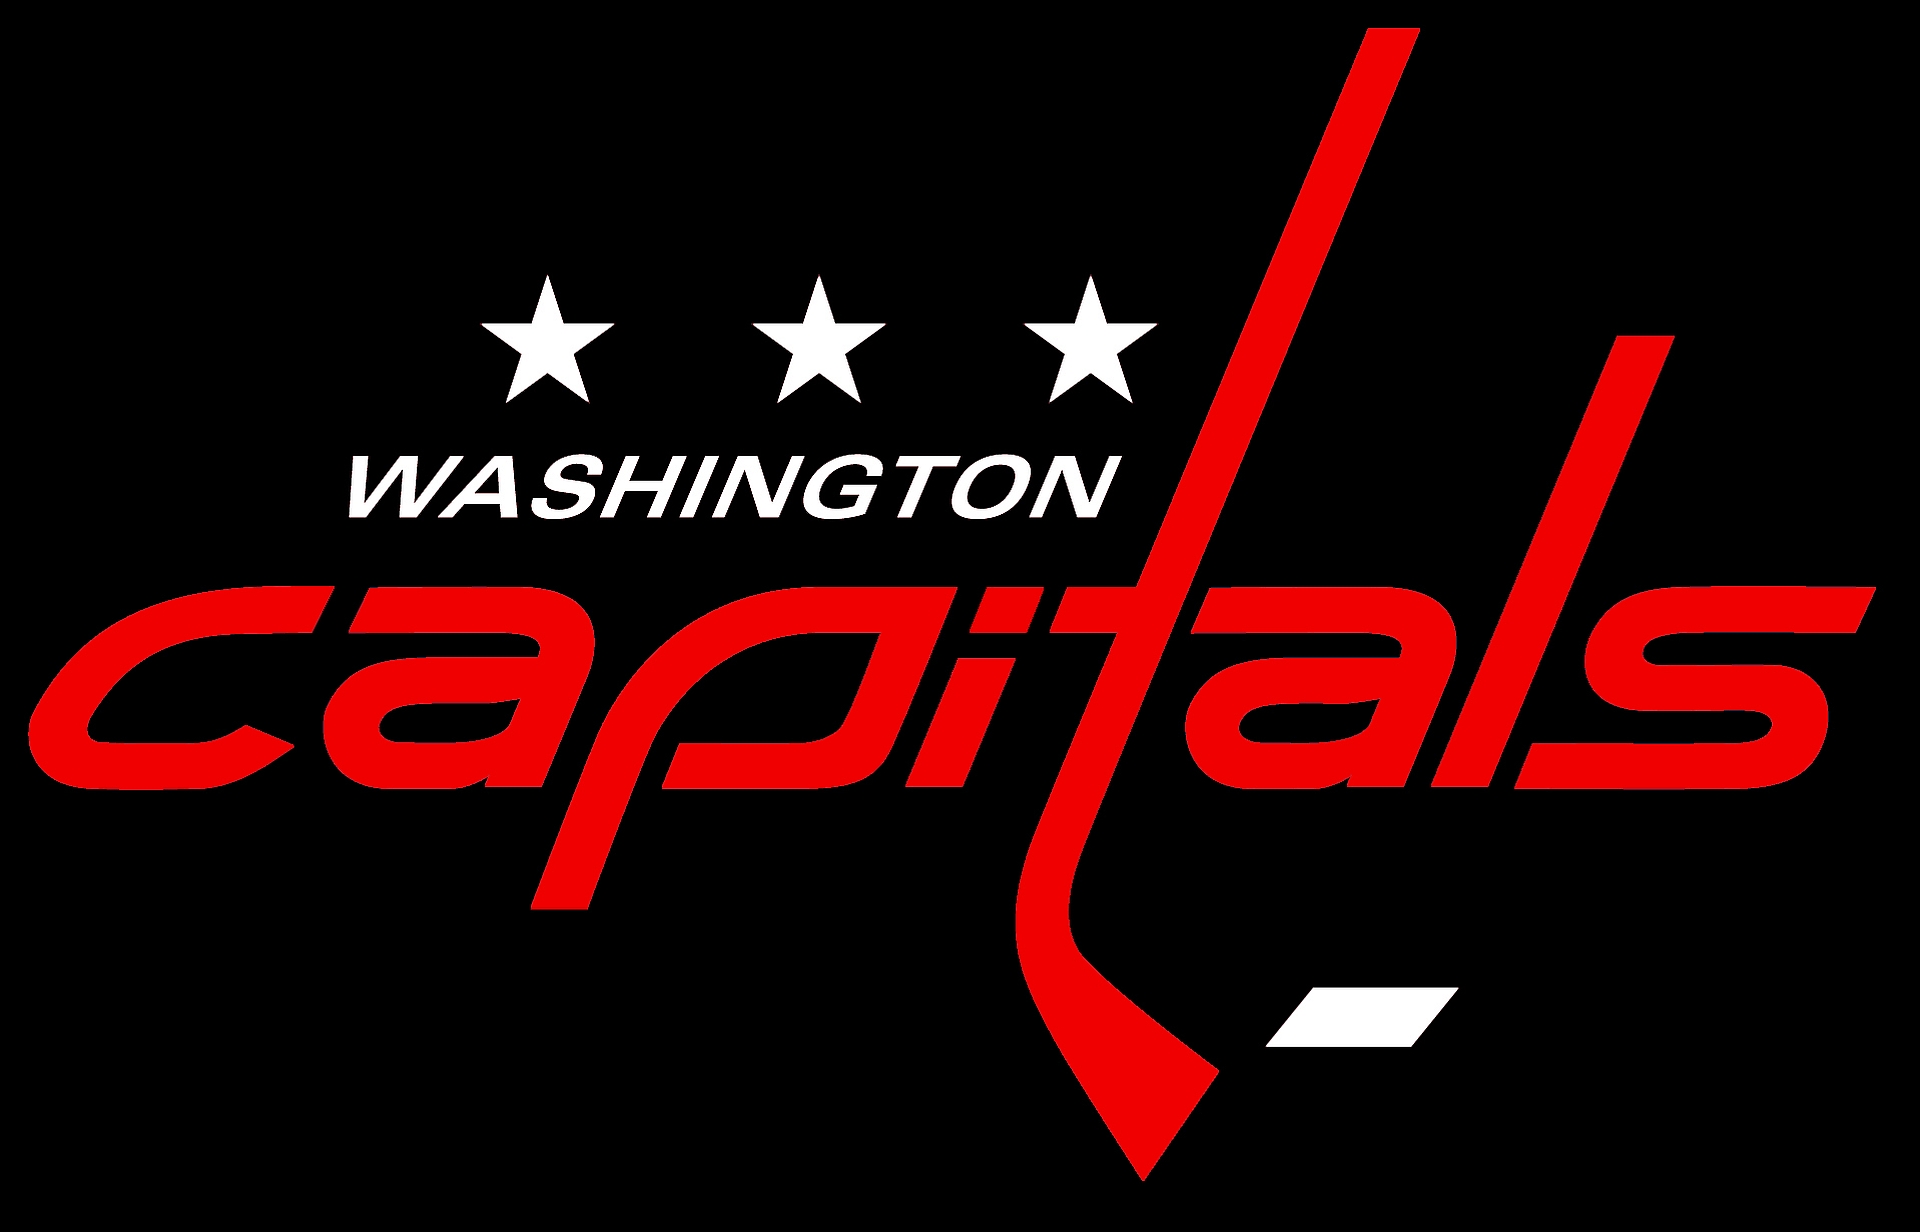 5 Washington Capitals HD Wallpapers Backgrounds - Wallpaper Abyss